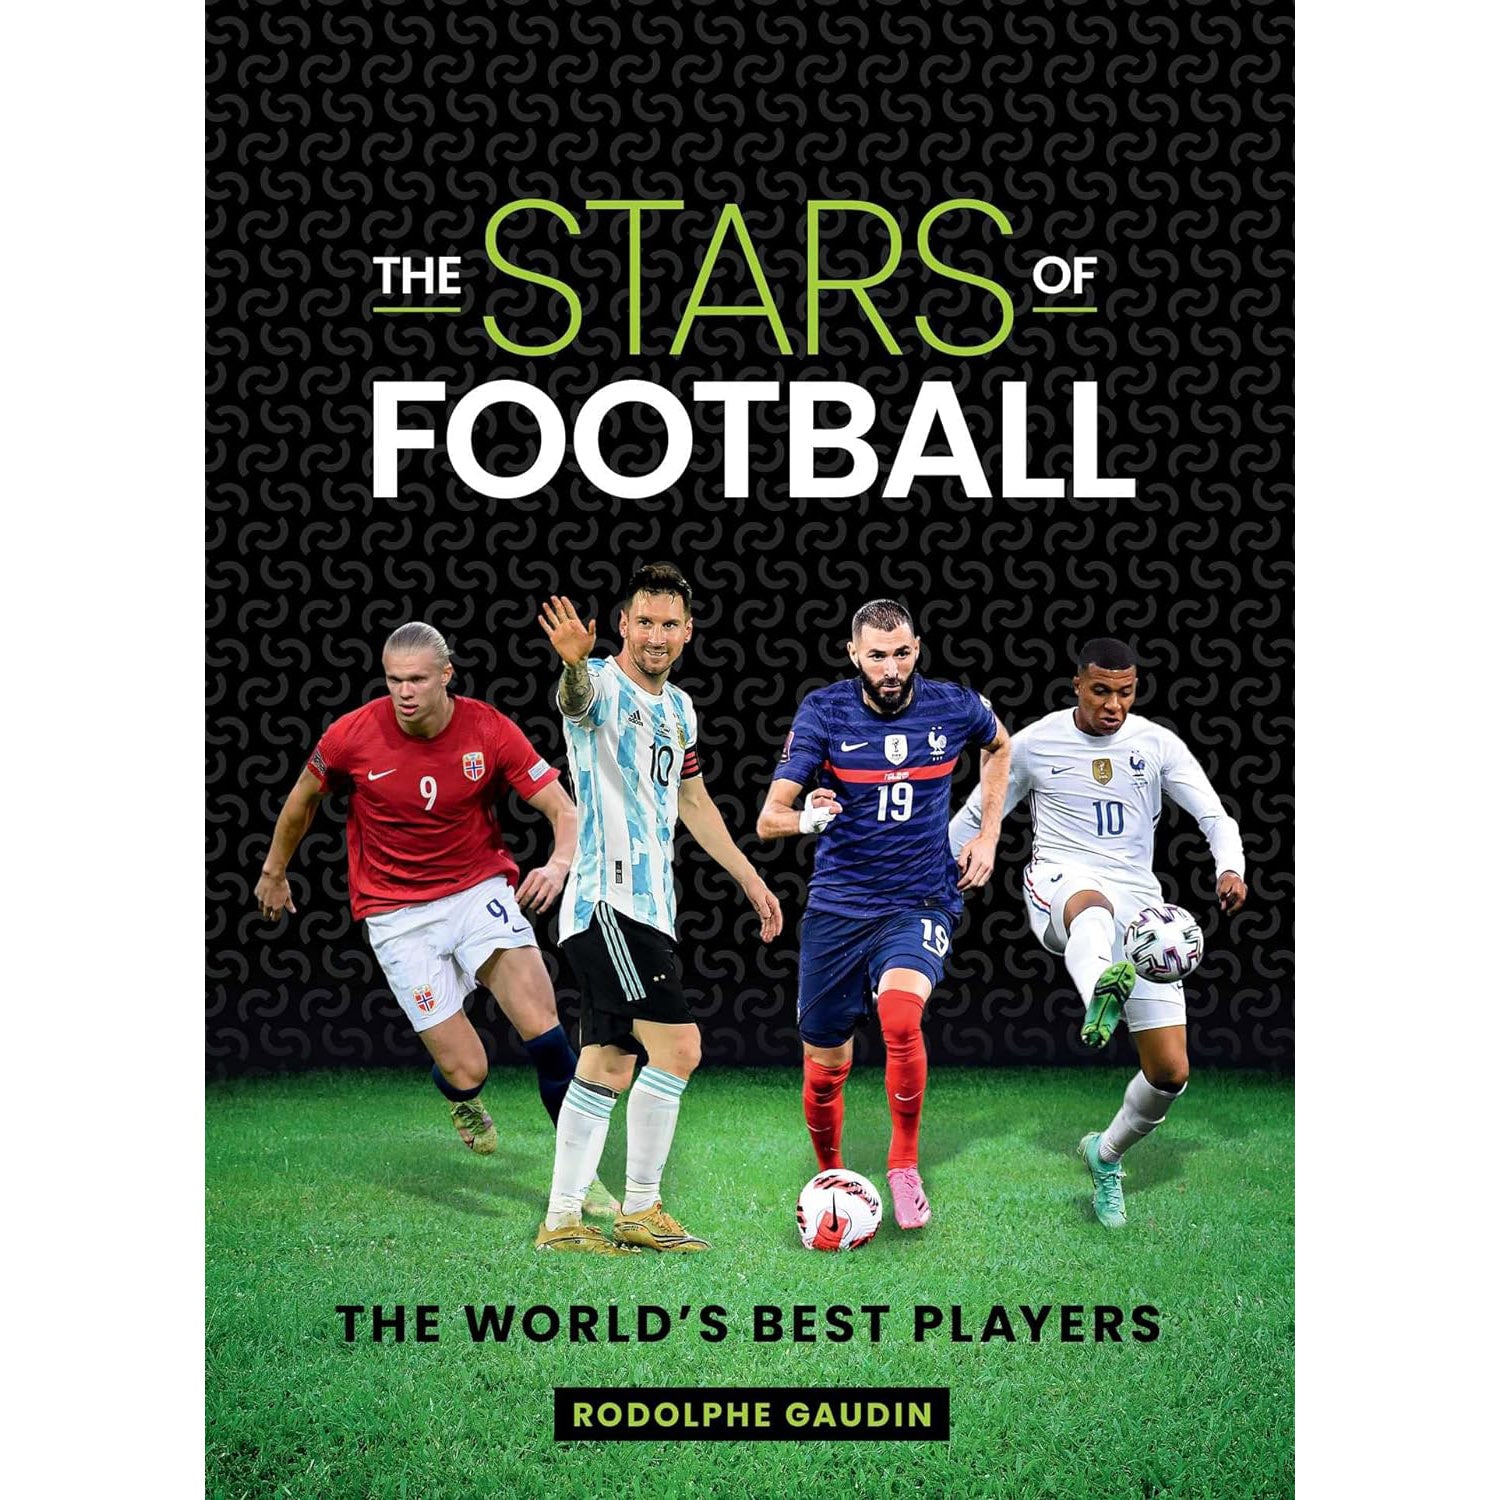 The Stars of Football – The World's Best Players